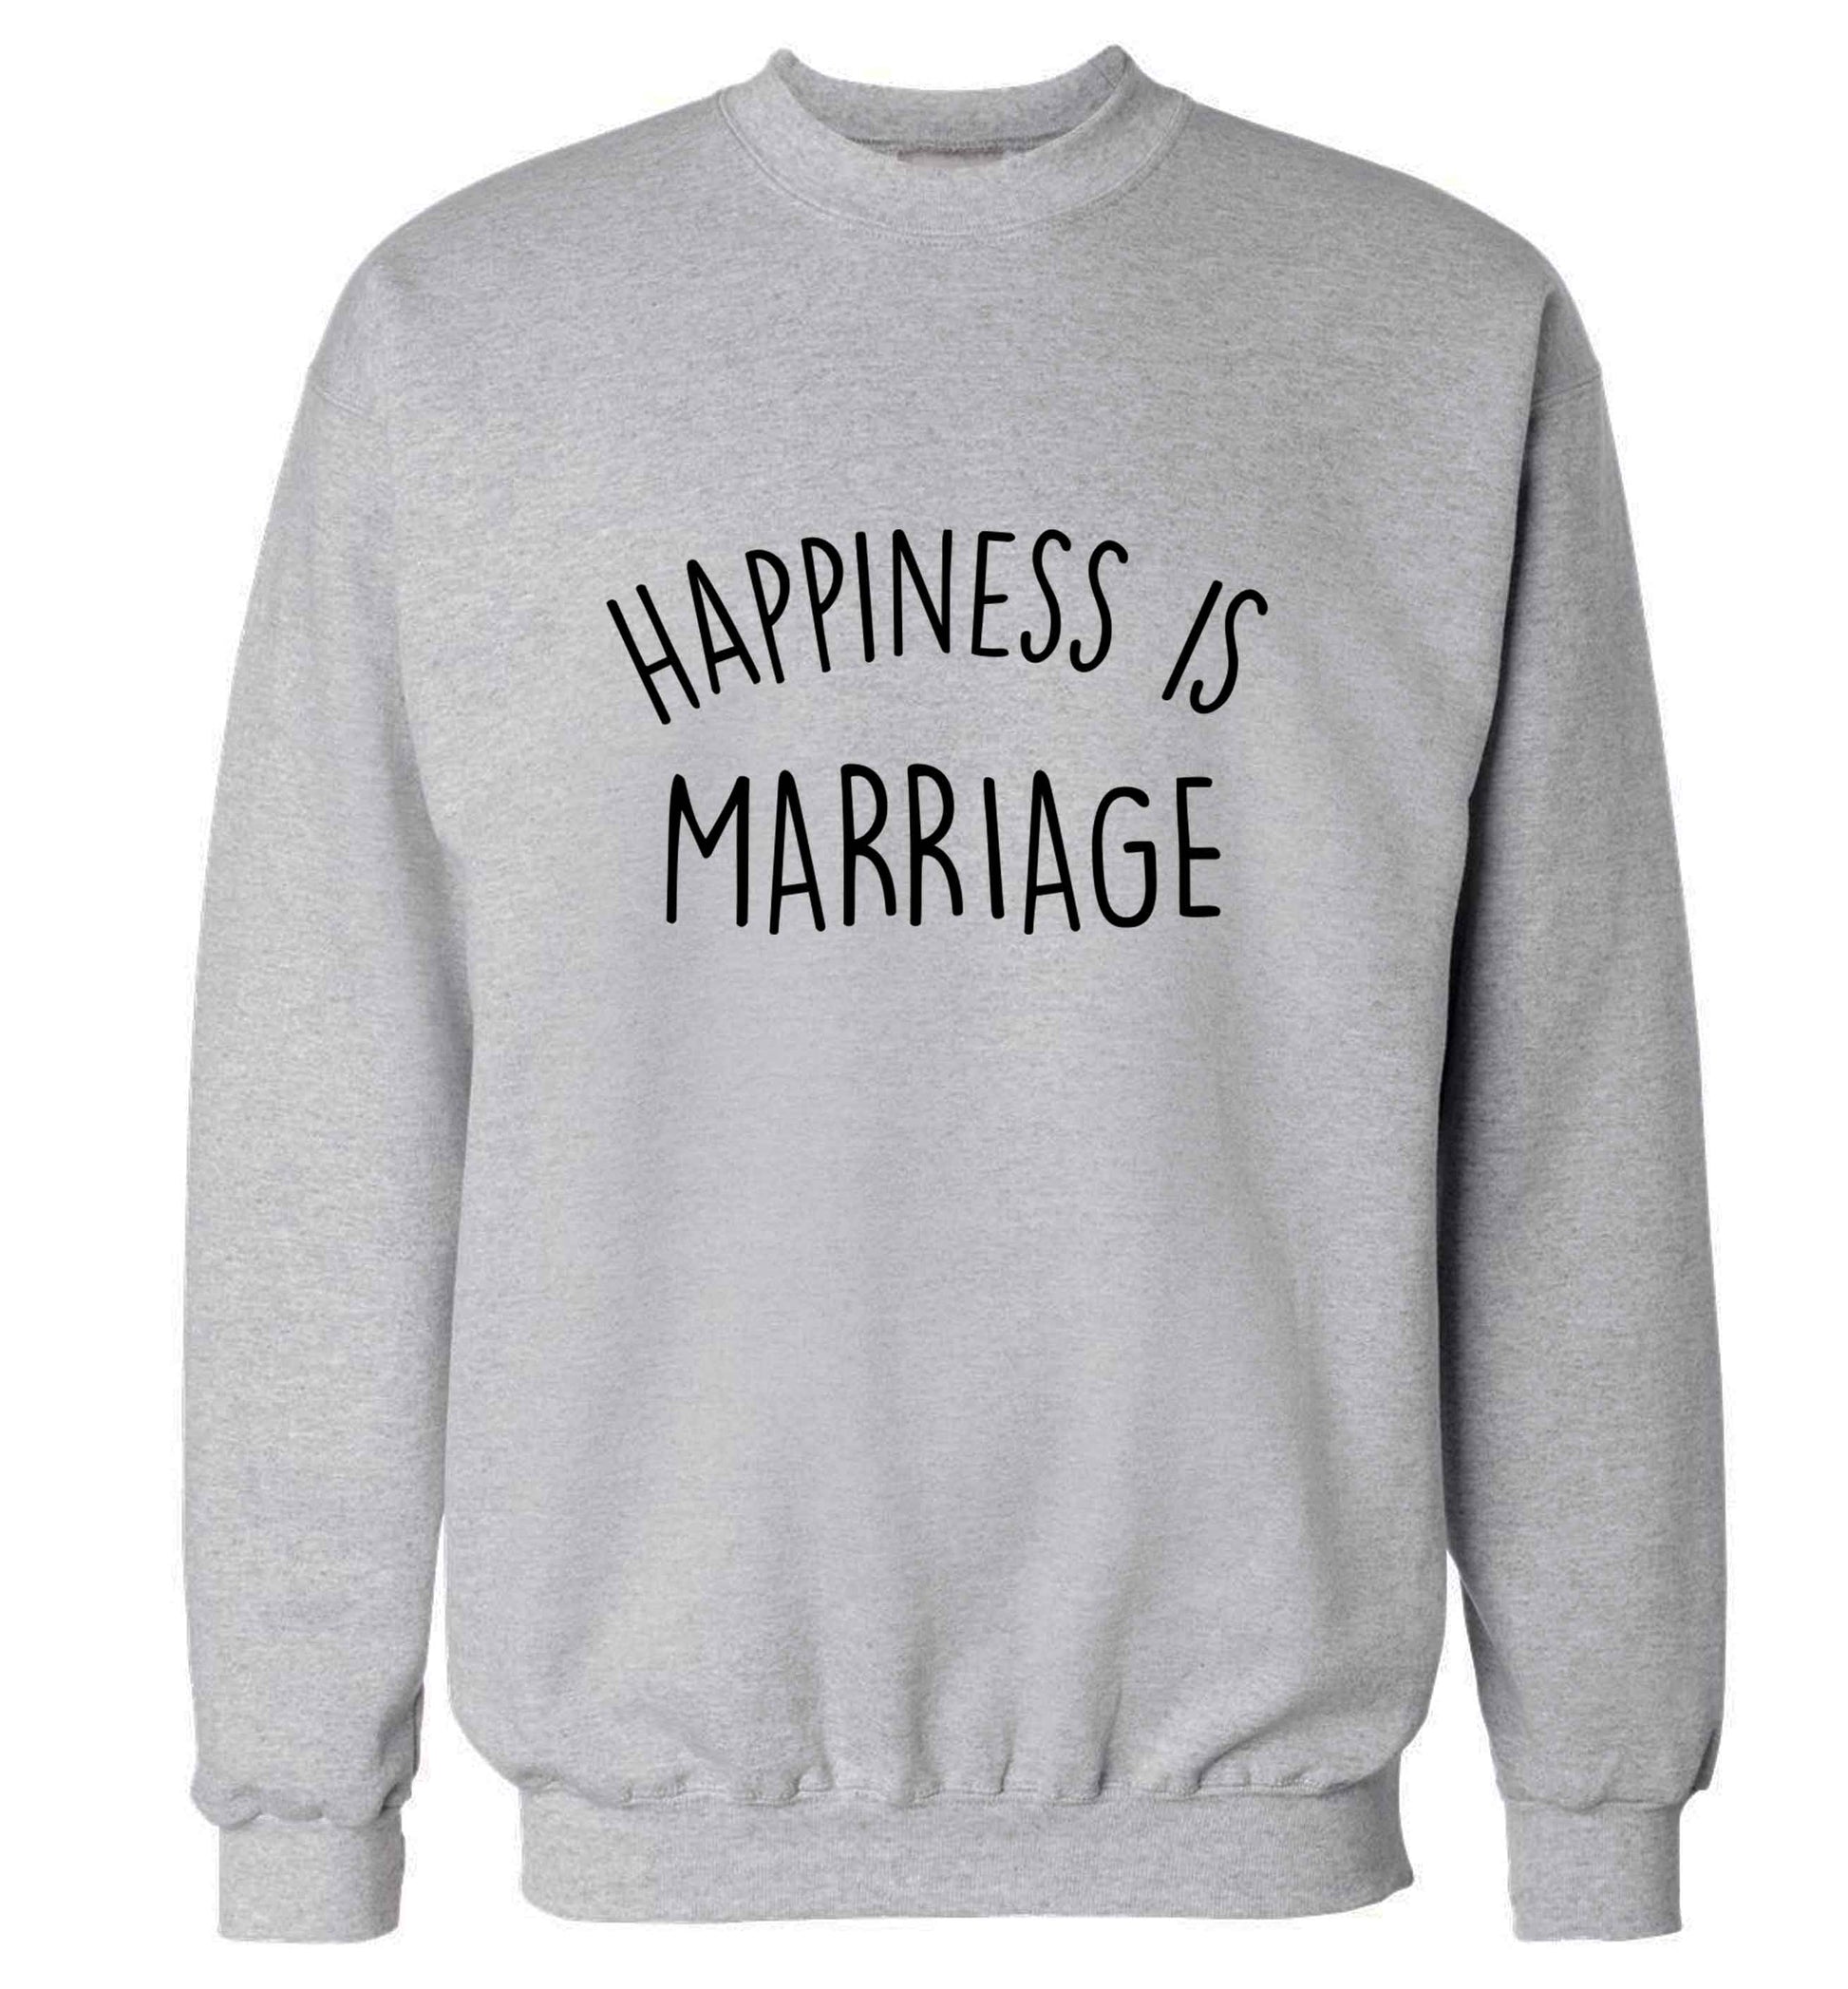 Happiness is marriage adult's unisex grey sweater 2XL